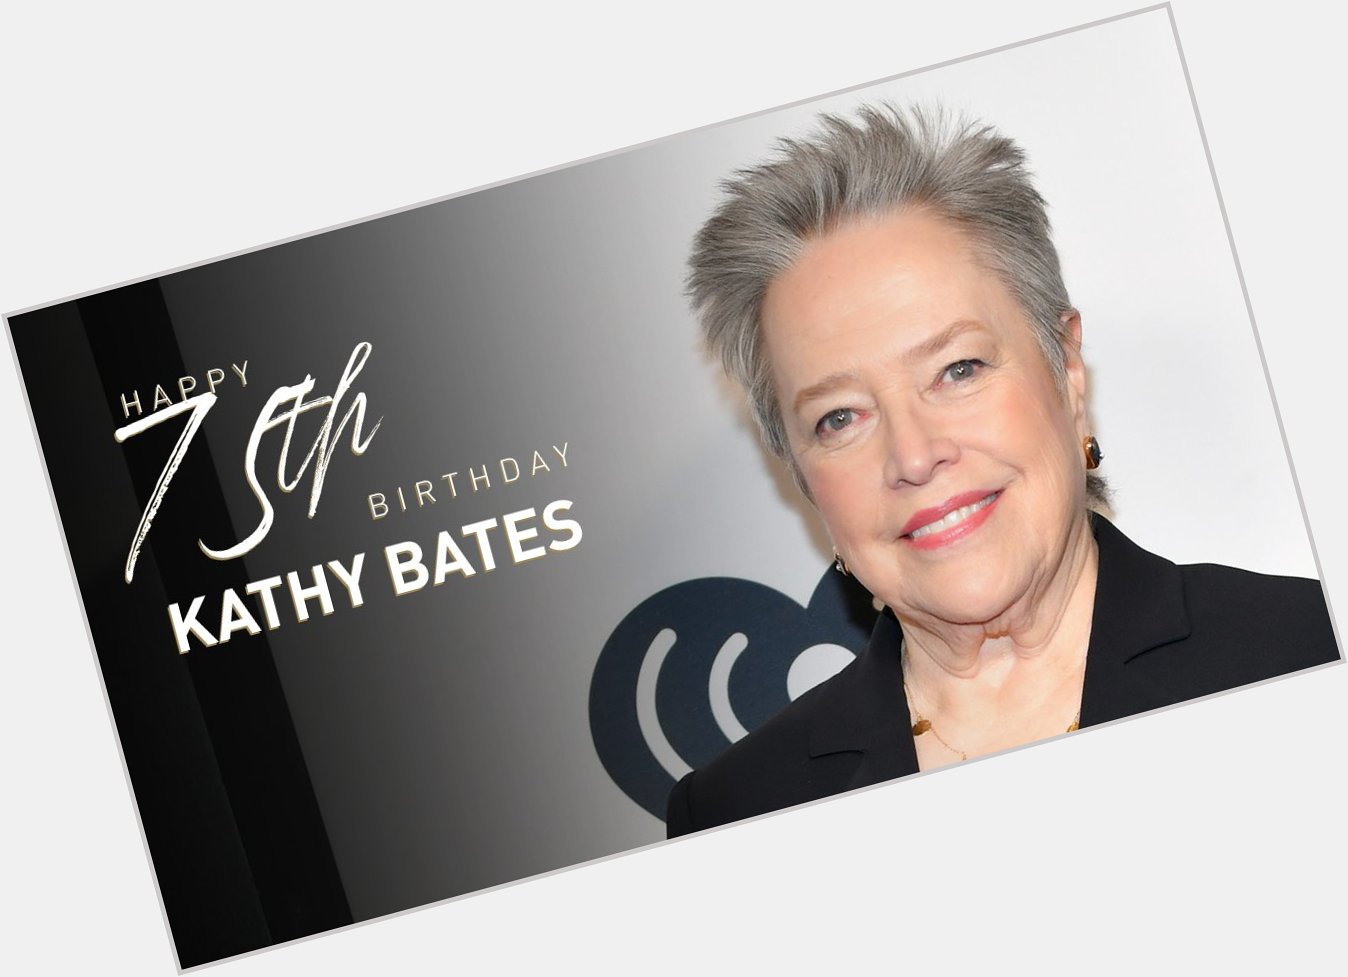 Happy 75th birthday Kathy Bates!

Watch her tribute here:  